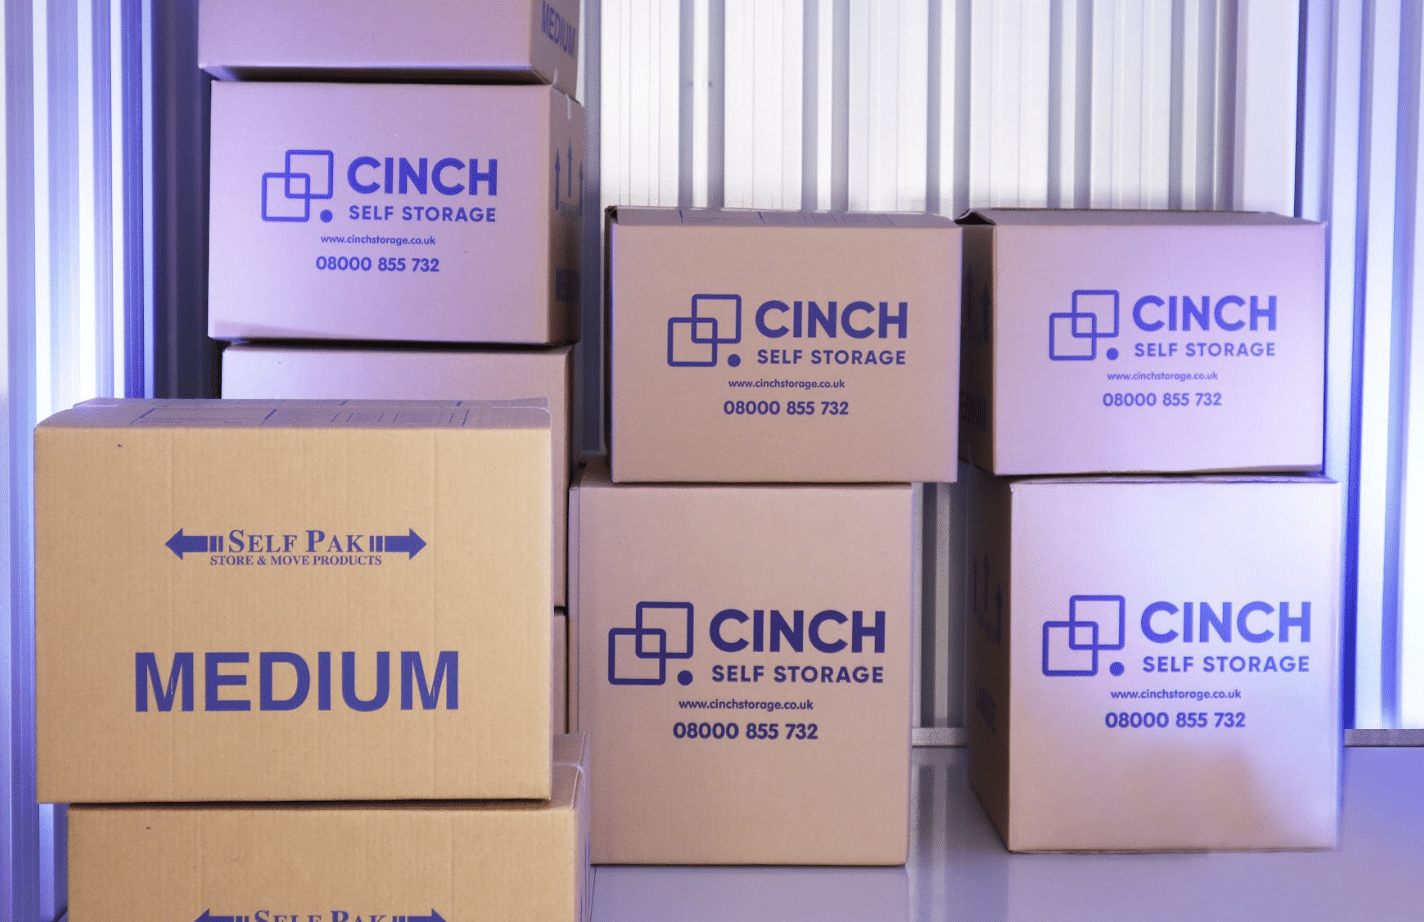 5 benefits of long term storage. Image shows the inside of a storage unit filled with branded cinch self storage cardboard boxes.